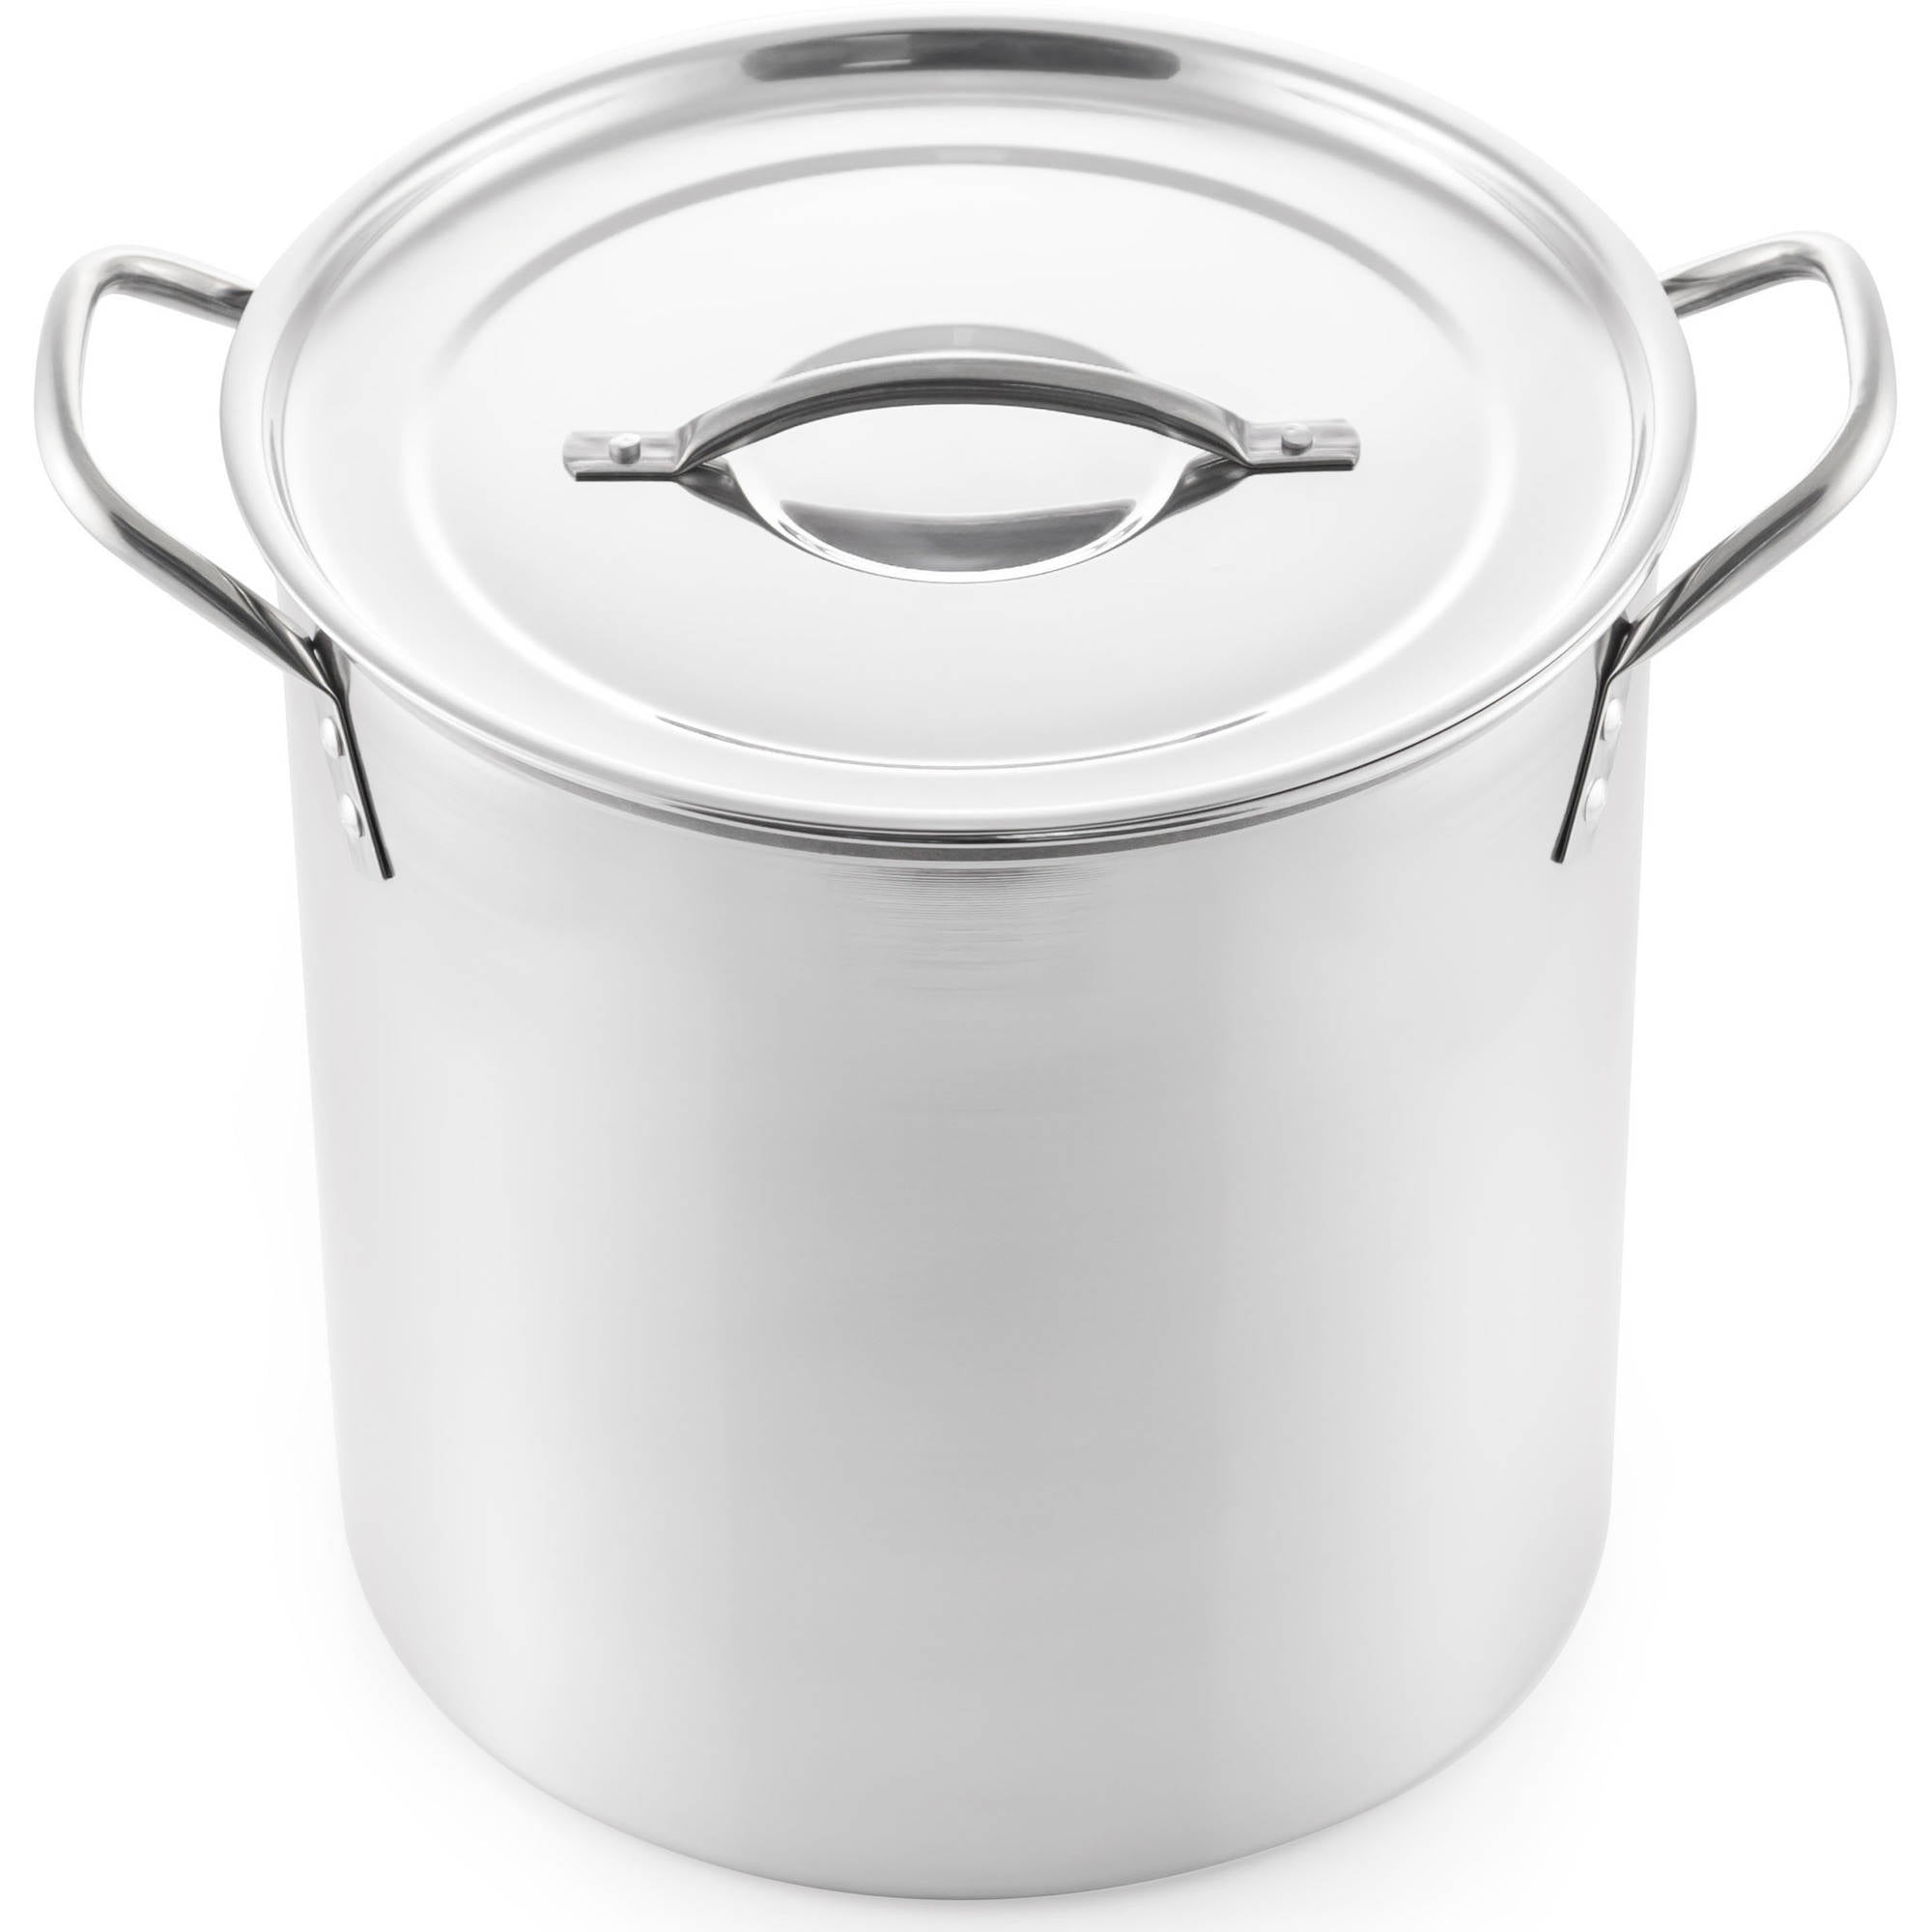 Crate & Barrel EvenCook Core 6 Qt. Stainless Steel Multipot with Glass  Straining Lid + Reviews